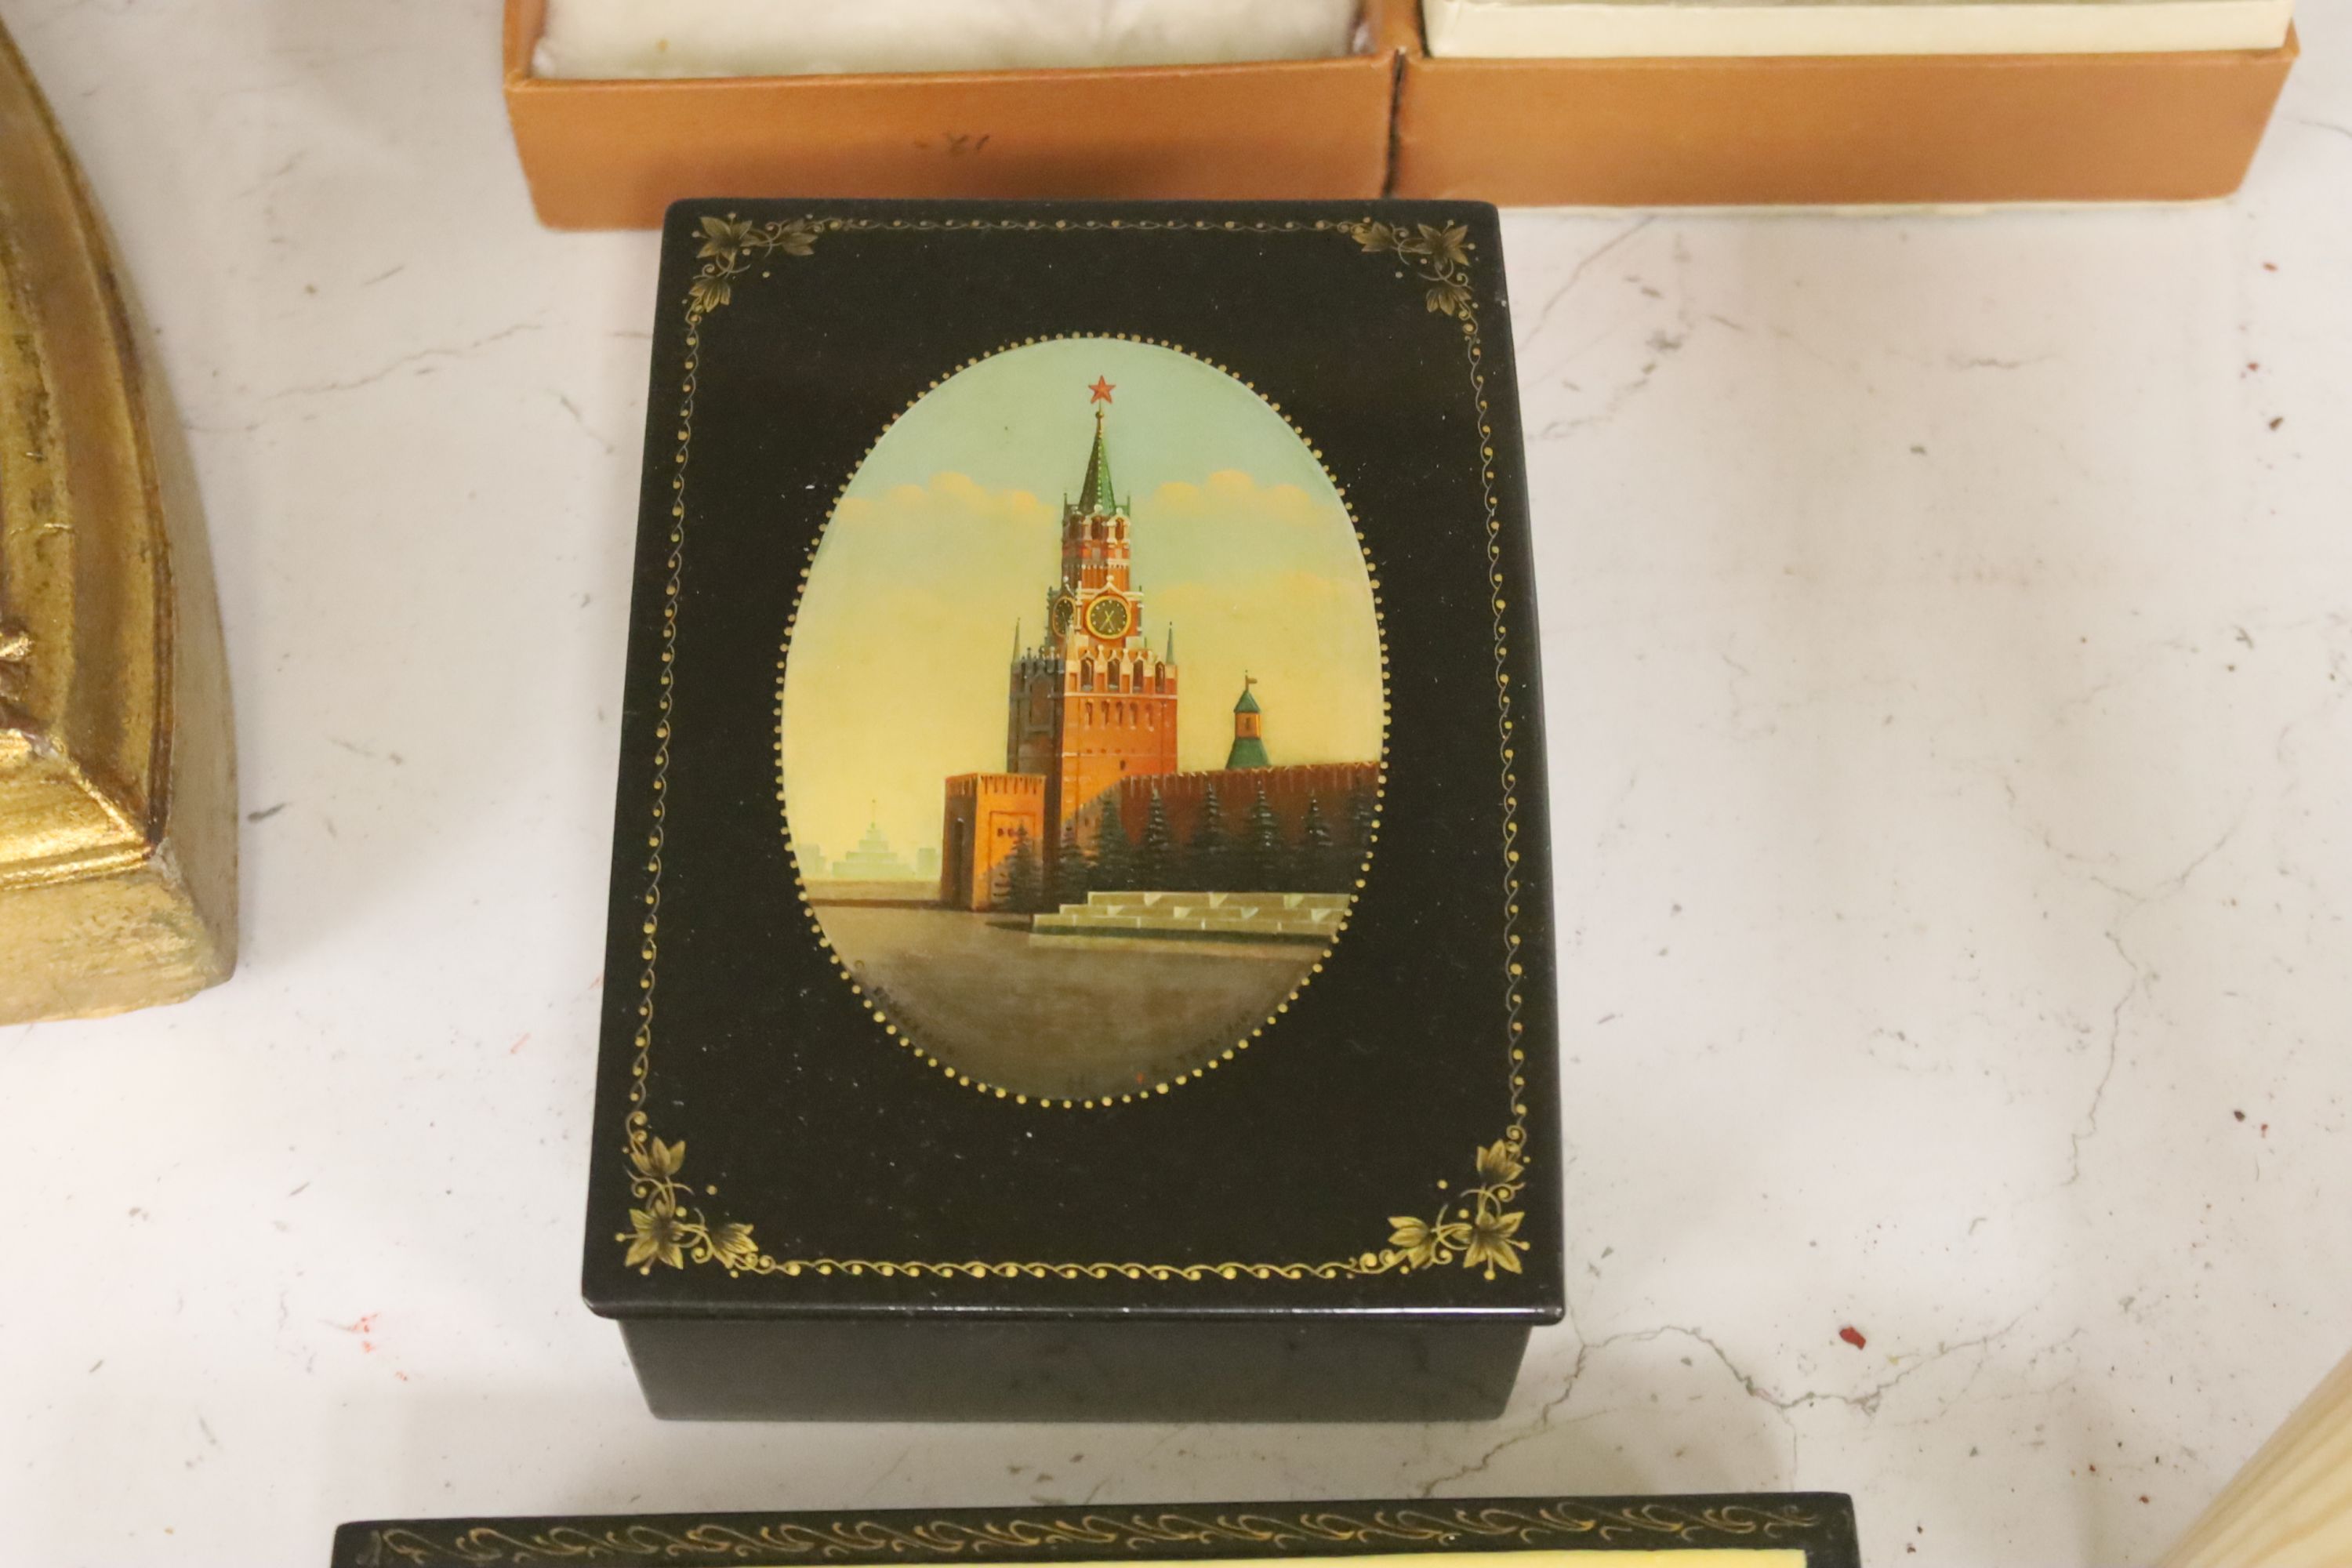 Six Russian Papier mache boxes, each decorated with churches or cathedrals, largest 17 cm